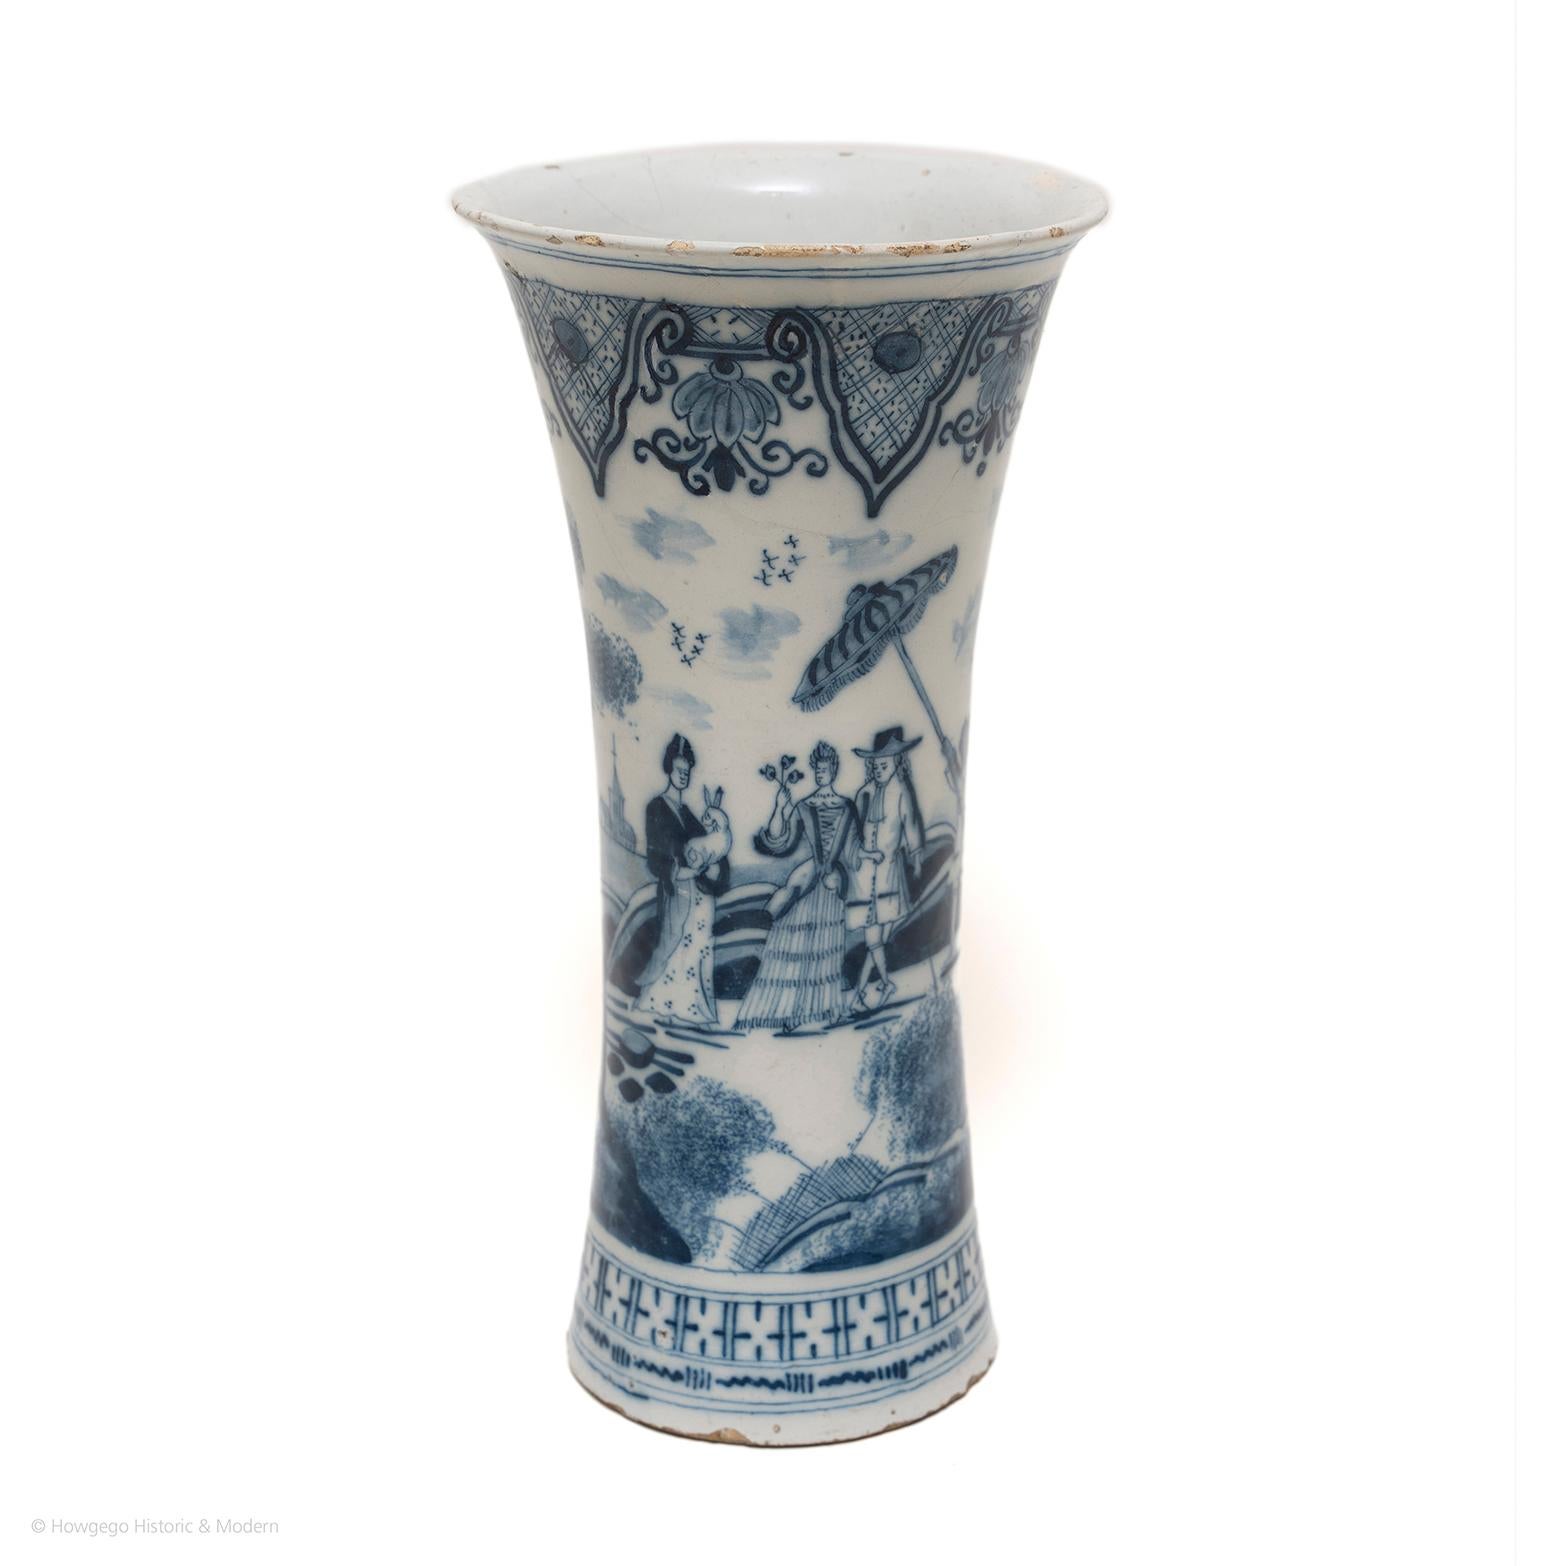 Unusual decoration blending a European pastoral landscape with Chinoiserie ornamentation. Suitable for everyday use.

The tapering body decorated with a European lady and a gentleman walking in a rural landscape with a manservant holding a parasol